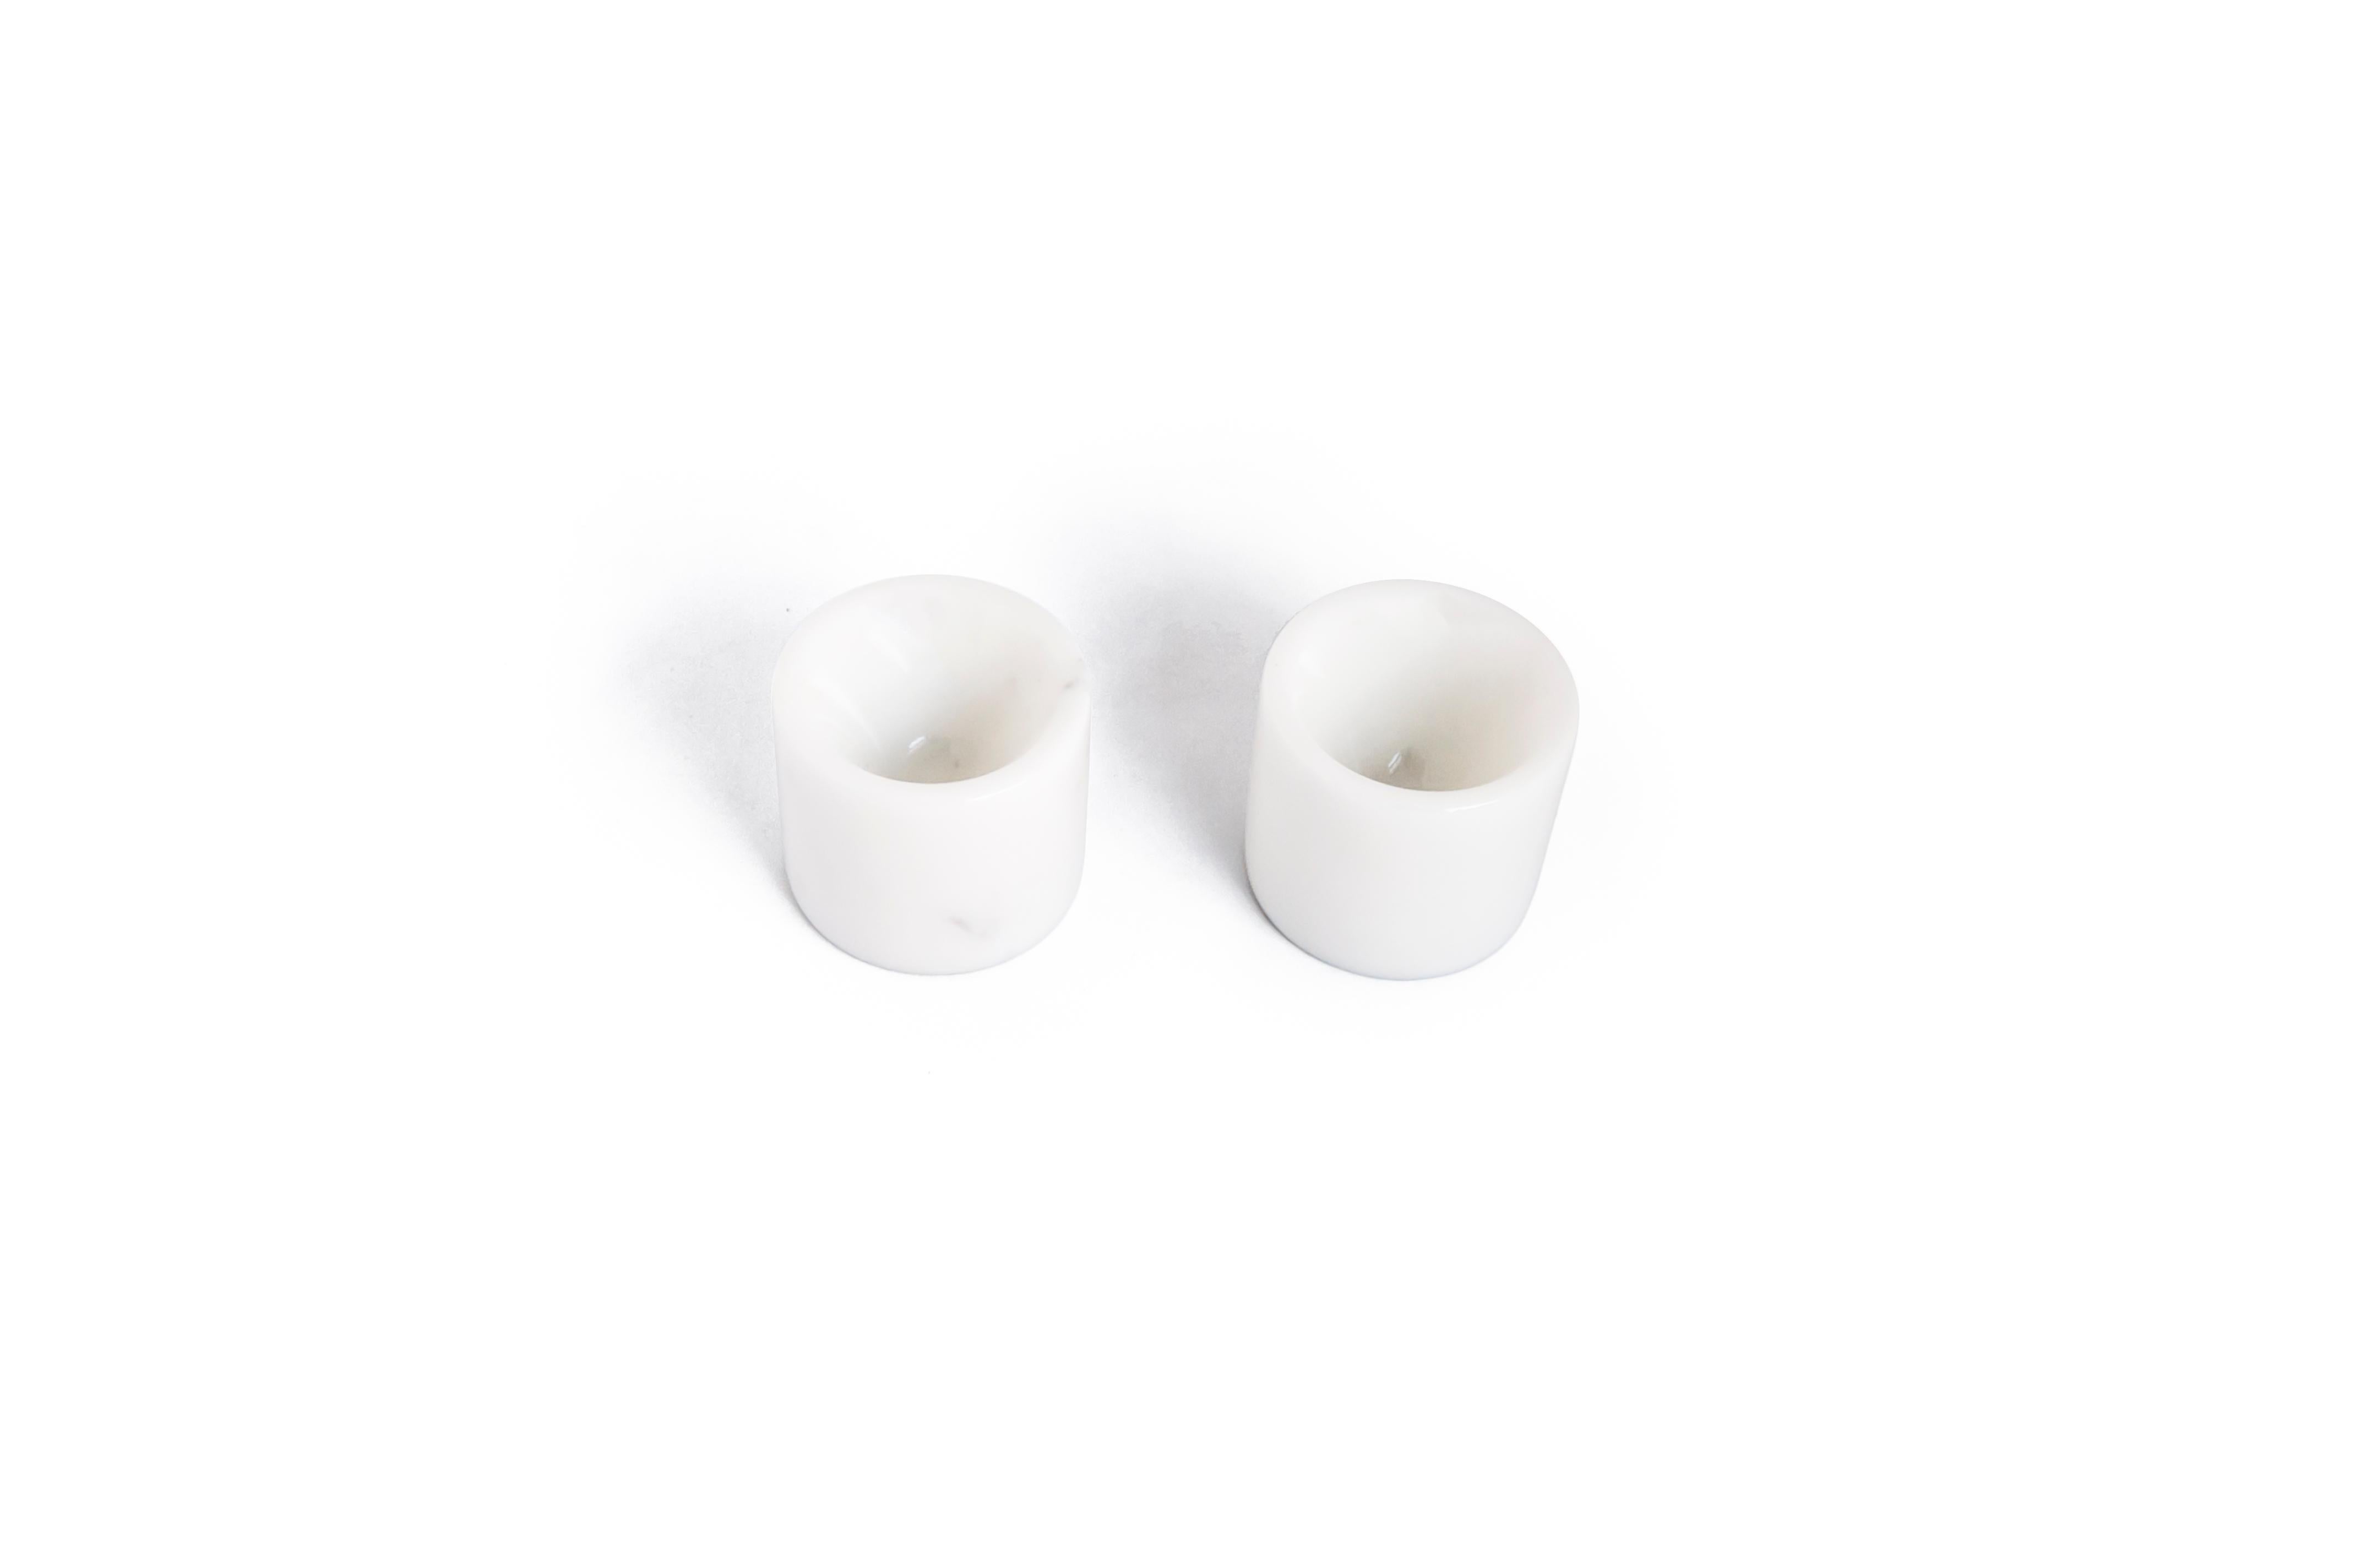 Set of 2 egg cups in white Carrara marble.

Each piece is unique and handmade by Italian artisans specialized over generations in processing the famous Carrara marble. Slight variations in shape, color and size are to be considered a guarantee of